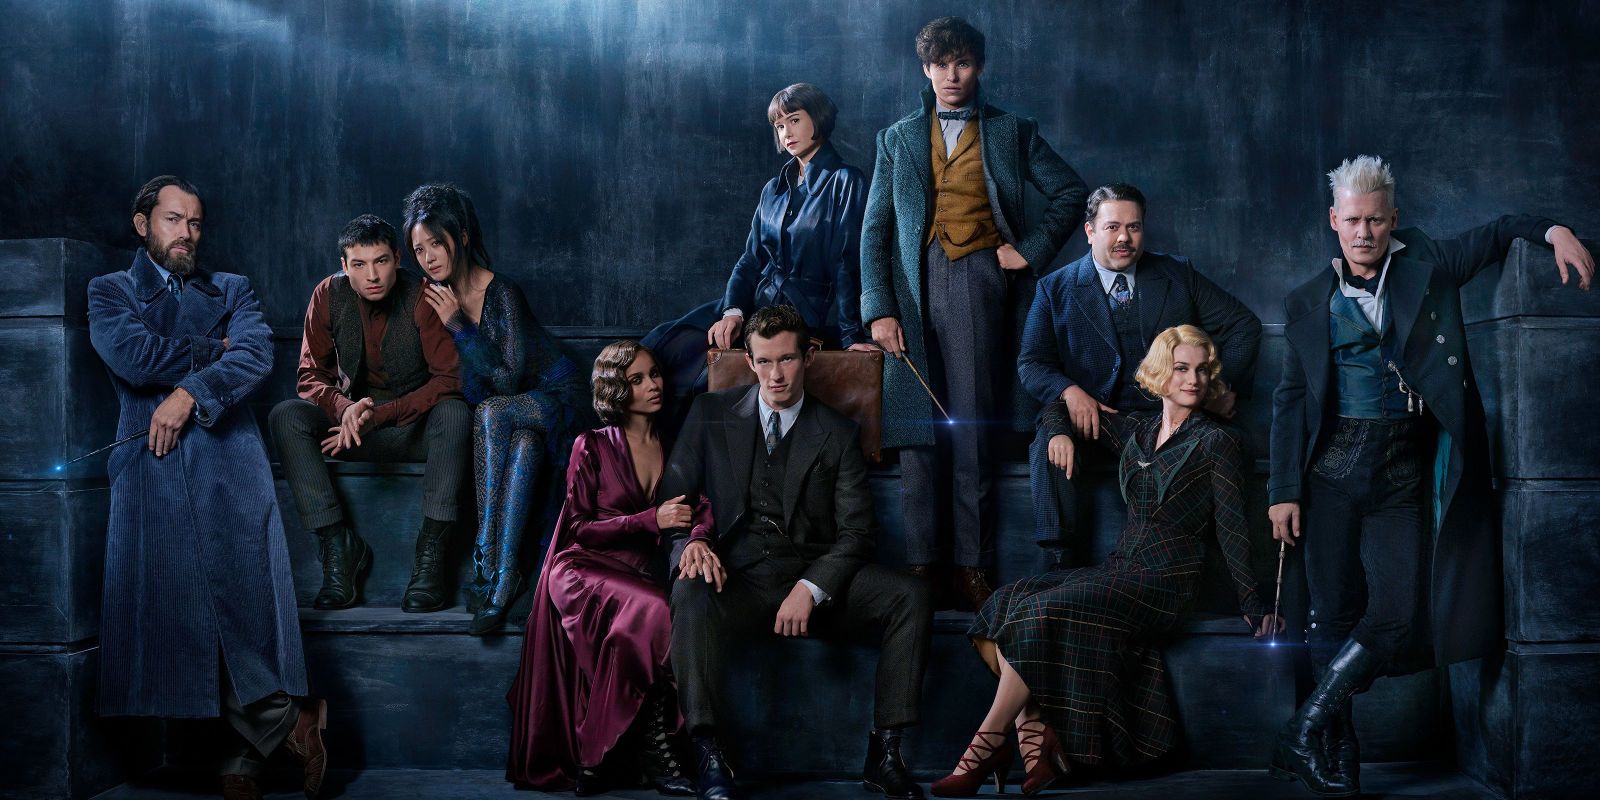 The Crimes of Grindelwald